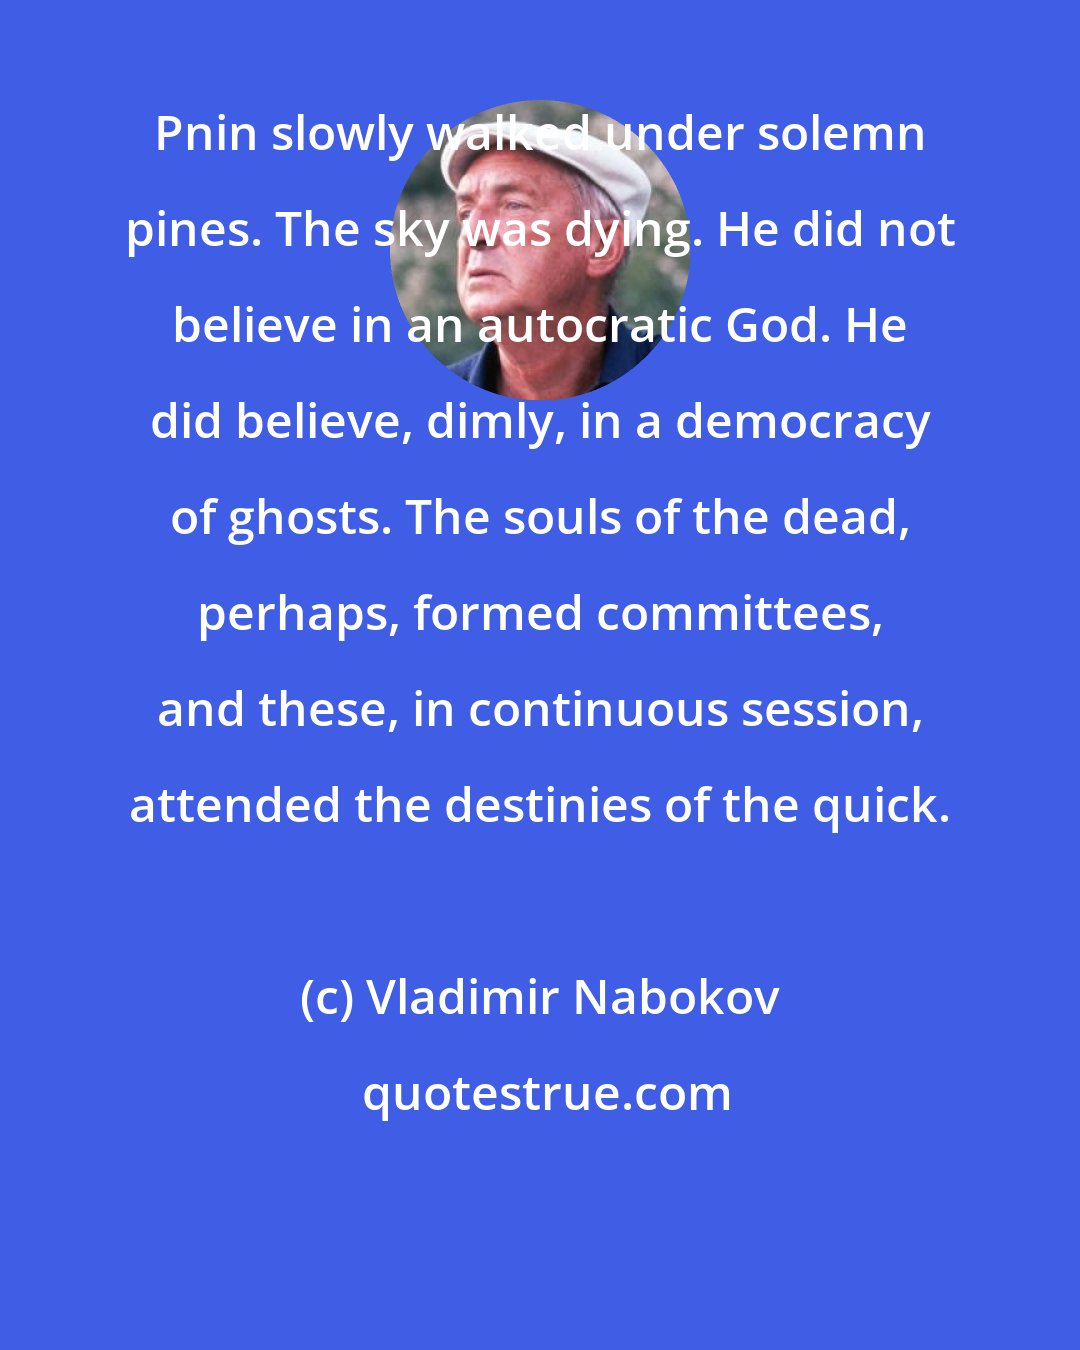 Vladimir Nabokov: Pnin slowly walked under solemn pines. The sky was dying. He did not believe in an autocratic God. He did believe, dimly, in a democracy of ghosts. The souls of the dead, perhaps, formed committees, and these, in continuous session, attended the destinies of the quick.